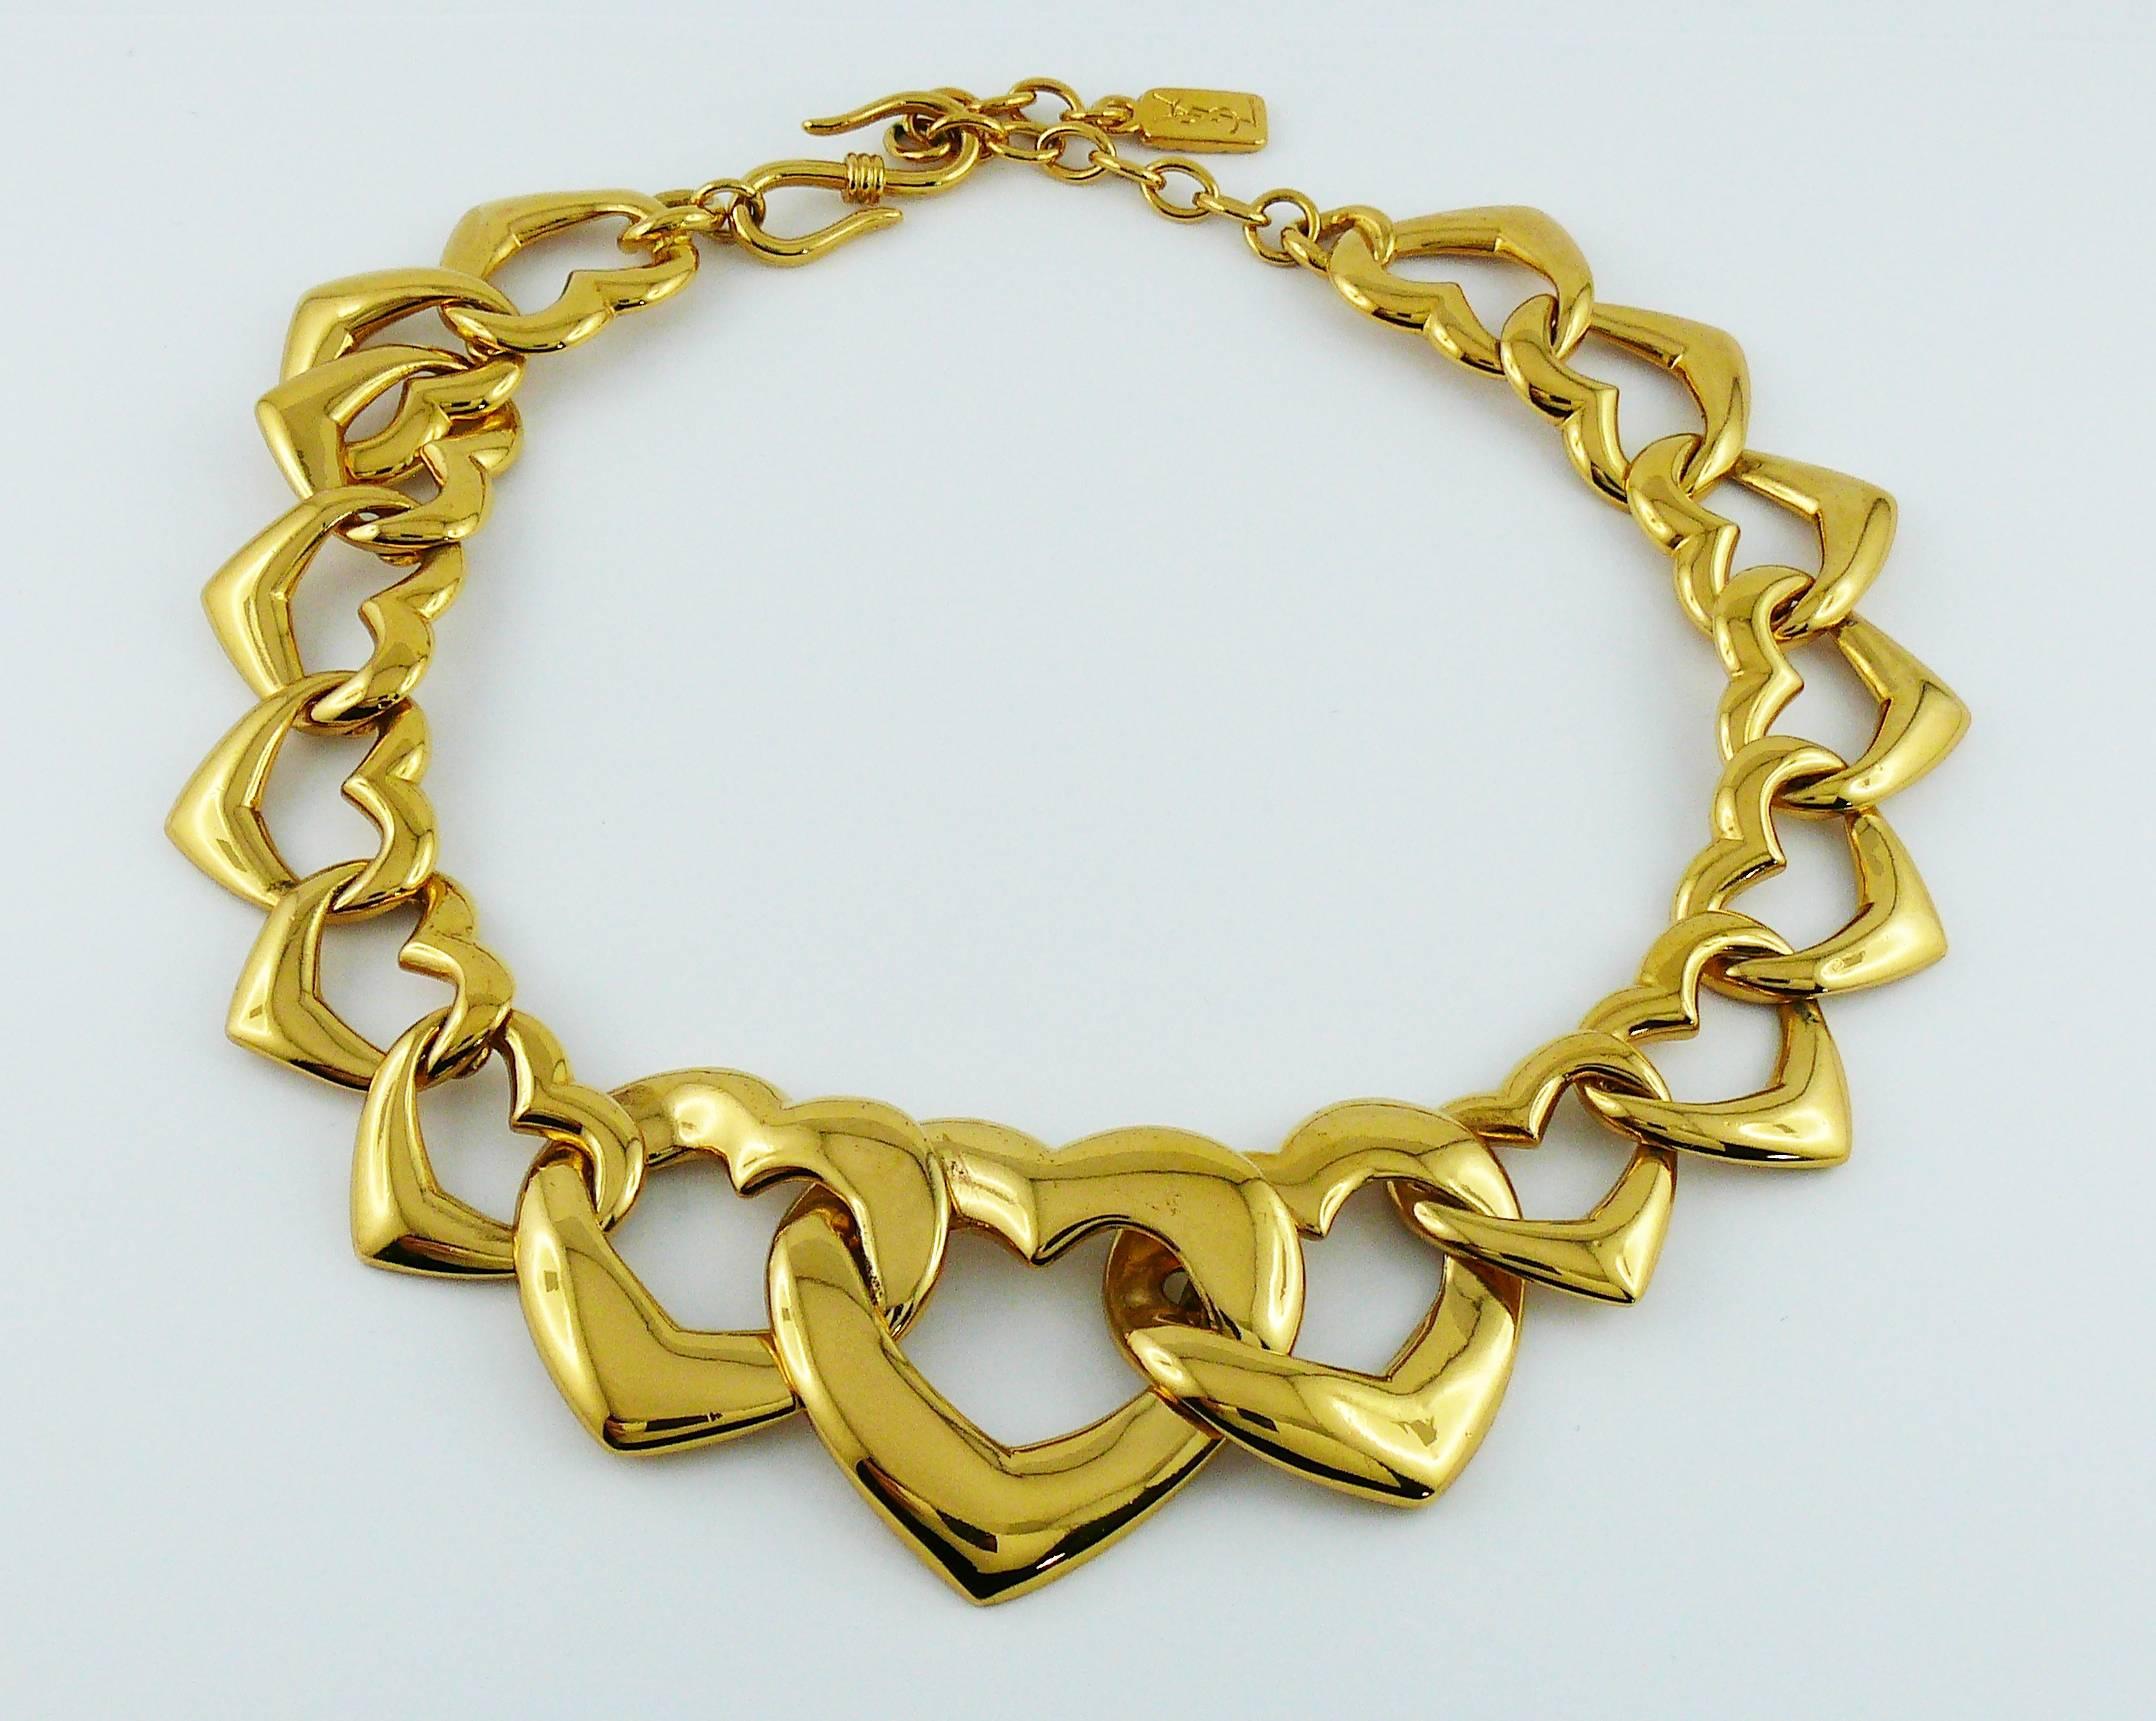 YVES SAINT LAURENT vintage gold toned necklace and bracelet set featuring hearts.

Marked YSL Made in France.

NECKLACE indicative measurements : max. length approx. 49 cm (19.29 inches) / adjustable length from approx 43 cm (16.93 inches) to